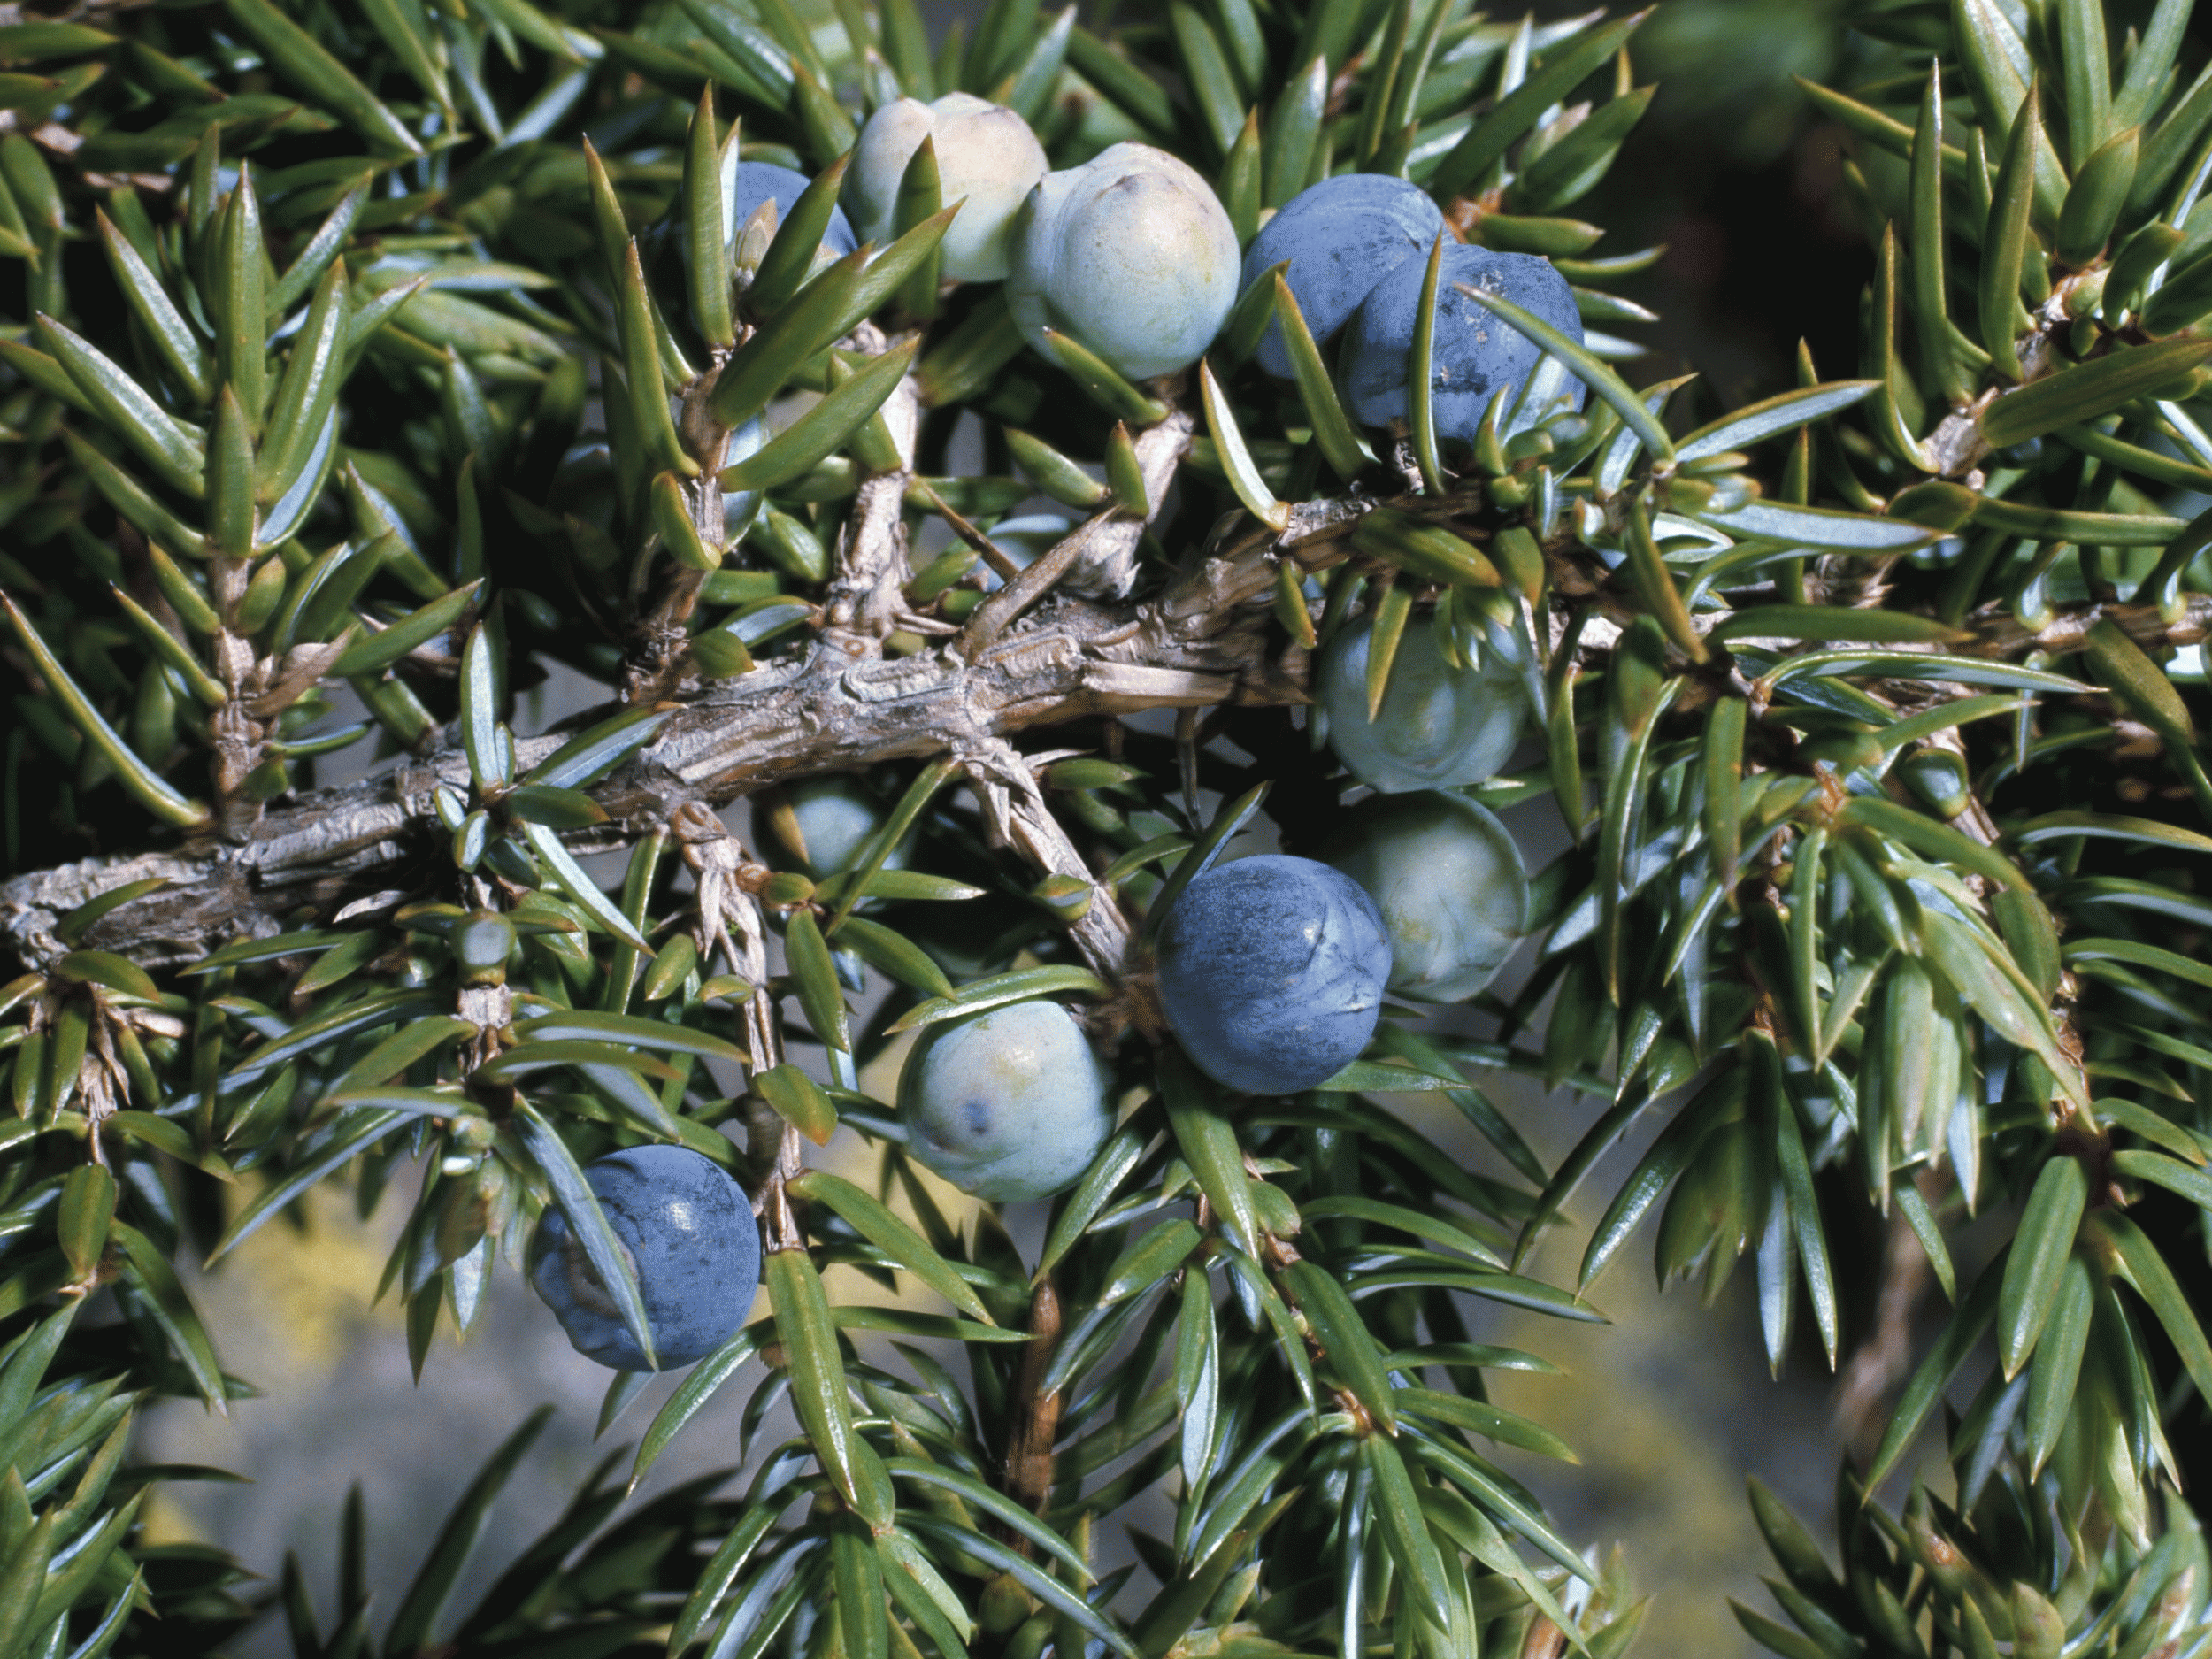 Conservation group Plantlife have run a survey showing 63 per cent of juniper trees are infected